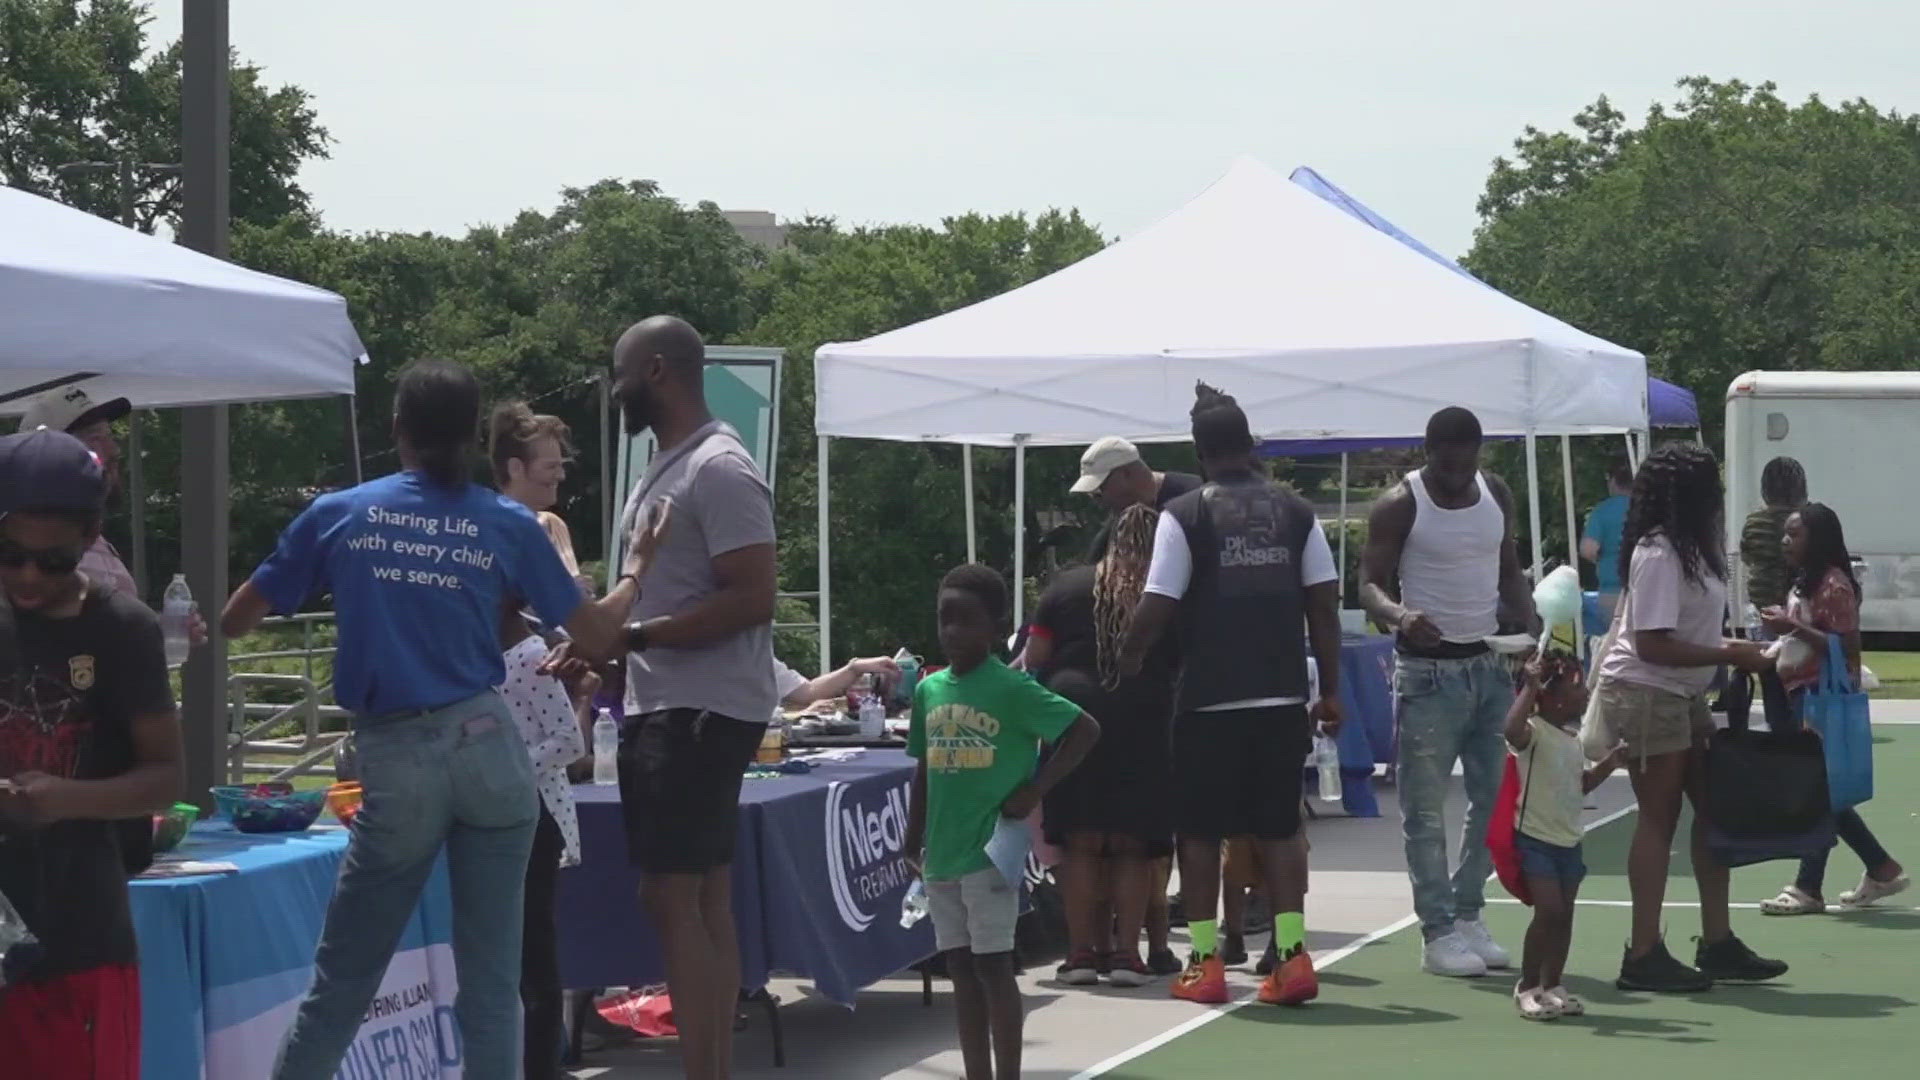 Vendors and community partners showcased their organizations with the push to provide structure to youths during the summer months.